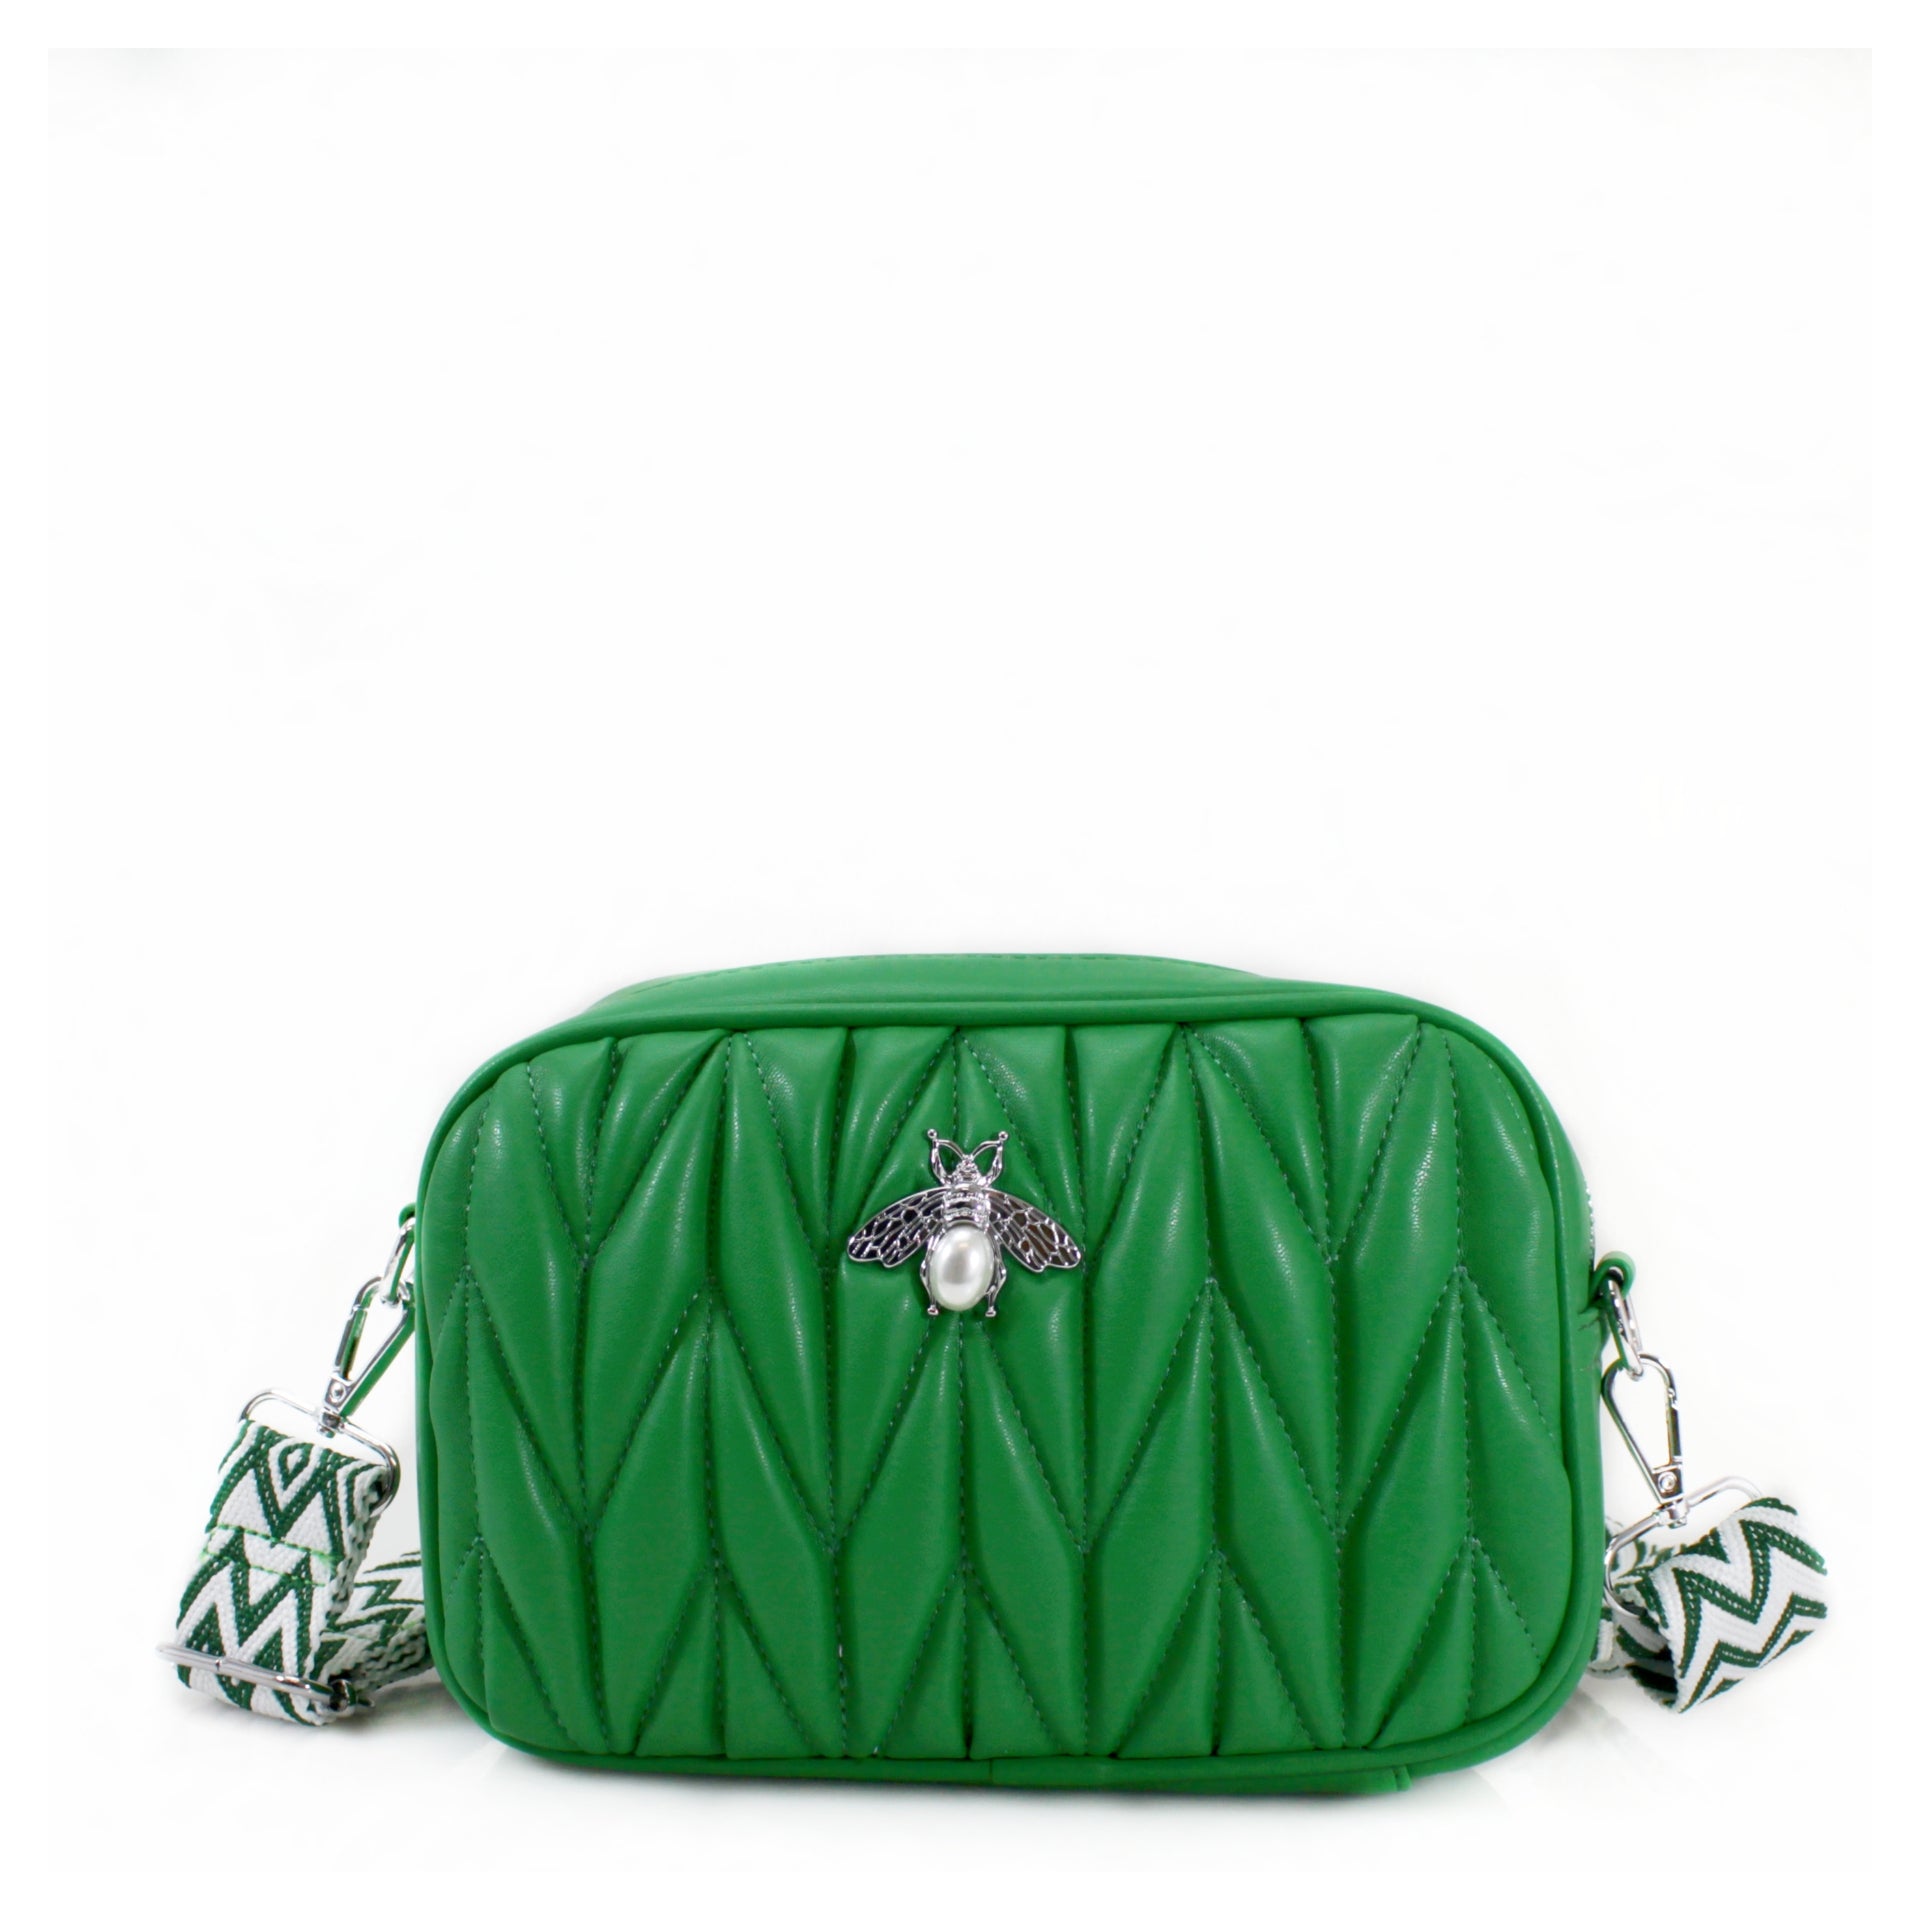 GREEN BEE LOGO QUILTED CROSS BODY BAG